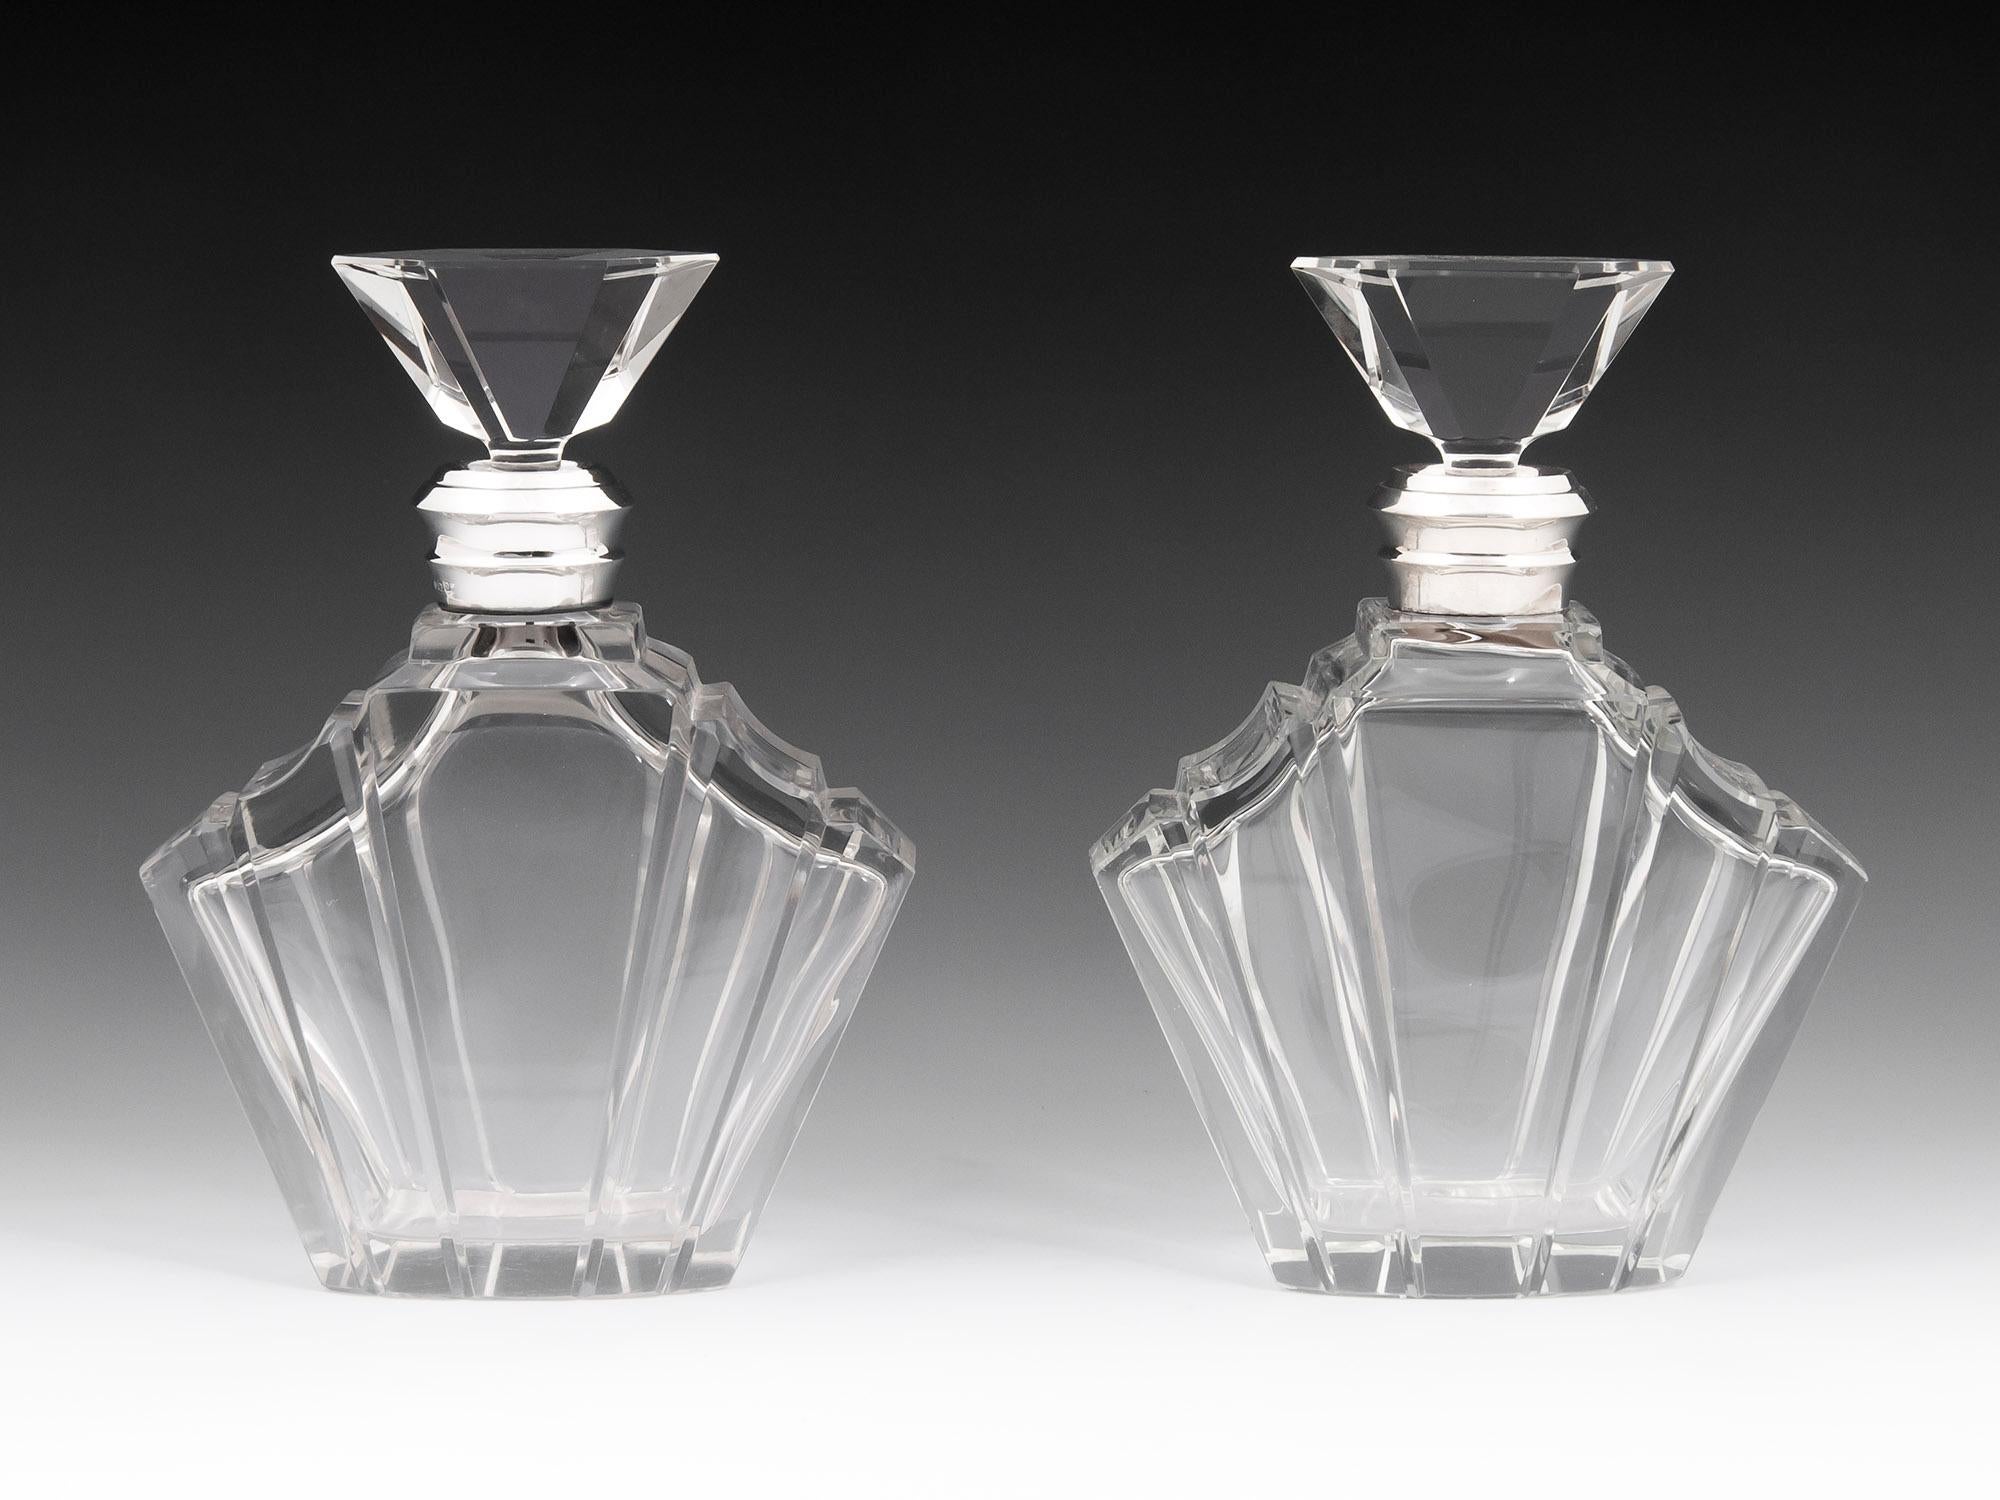 Pair of Art Deco uniquely fan-shaped heavy lead crystal decanters with beautiful step shoulder design, sterling silver collars and beautifully shaped stoppers.
This exquisite decadent pair of luxurious decanters bare the hallmarks for two famous